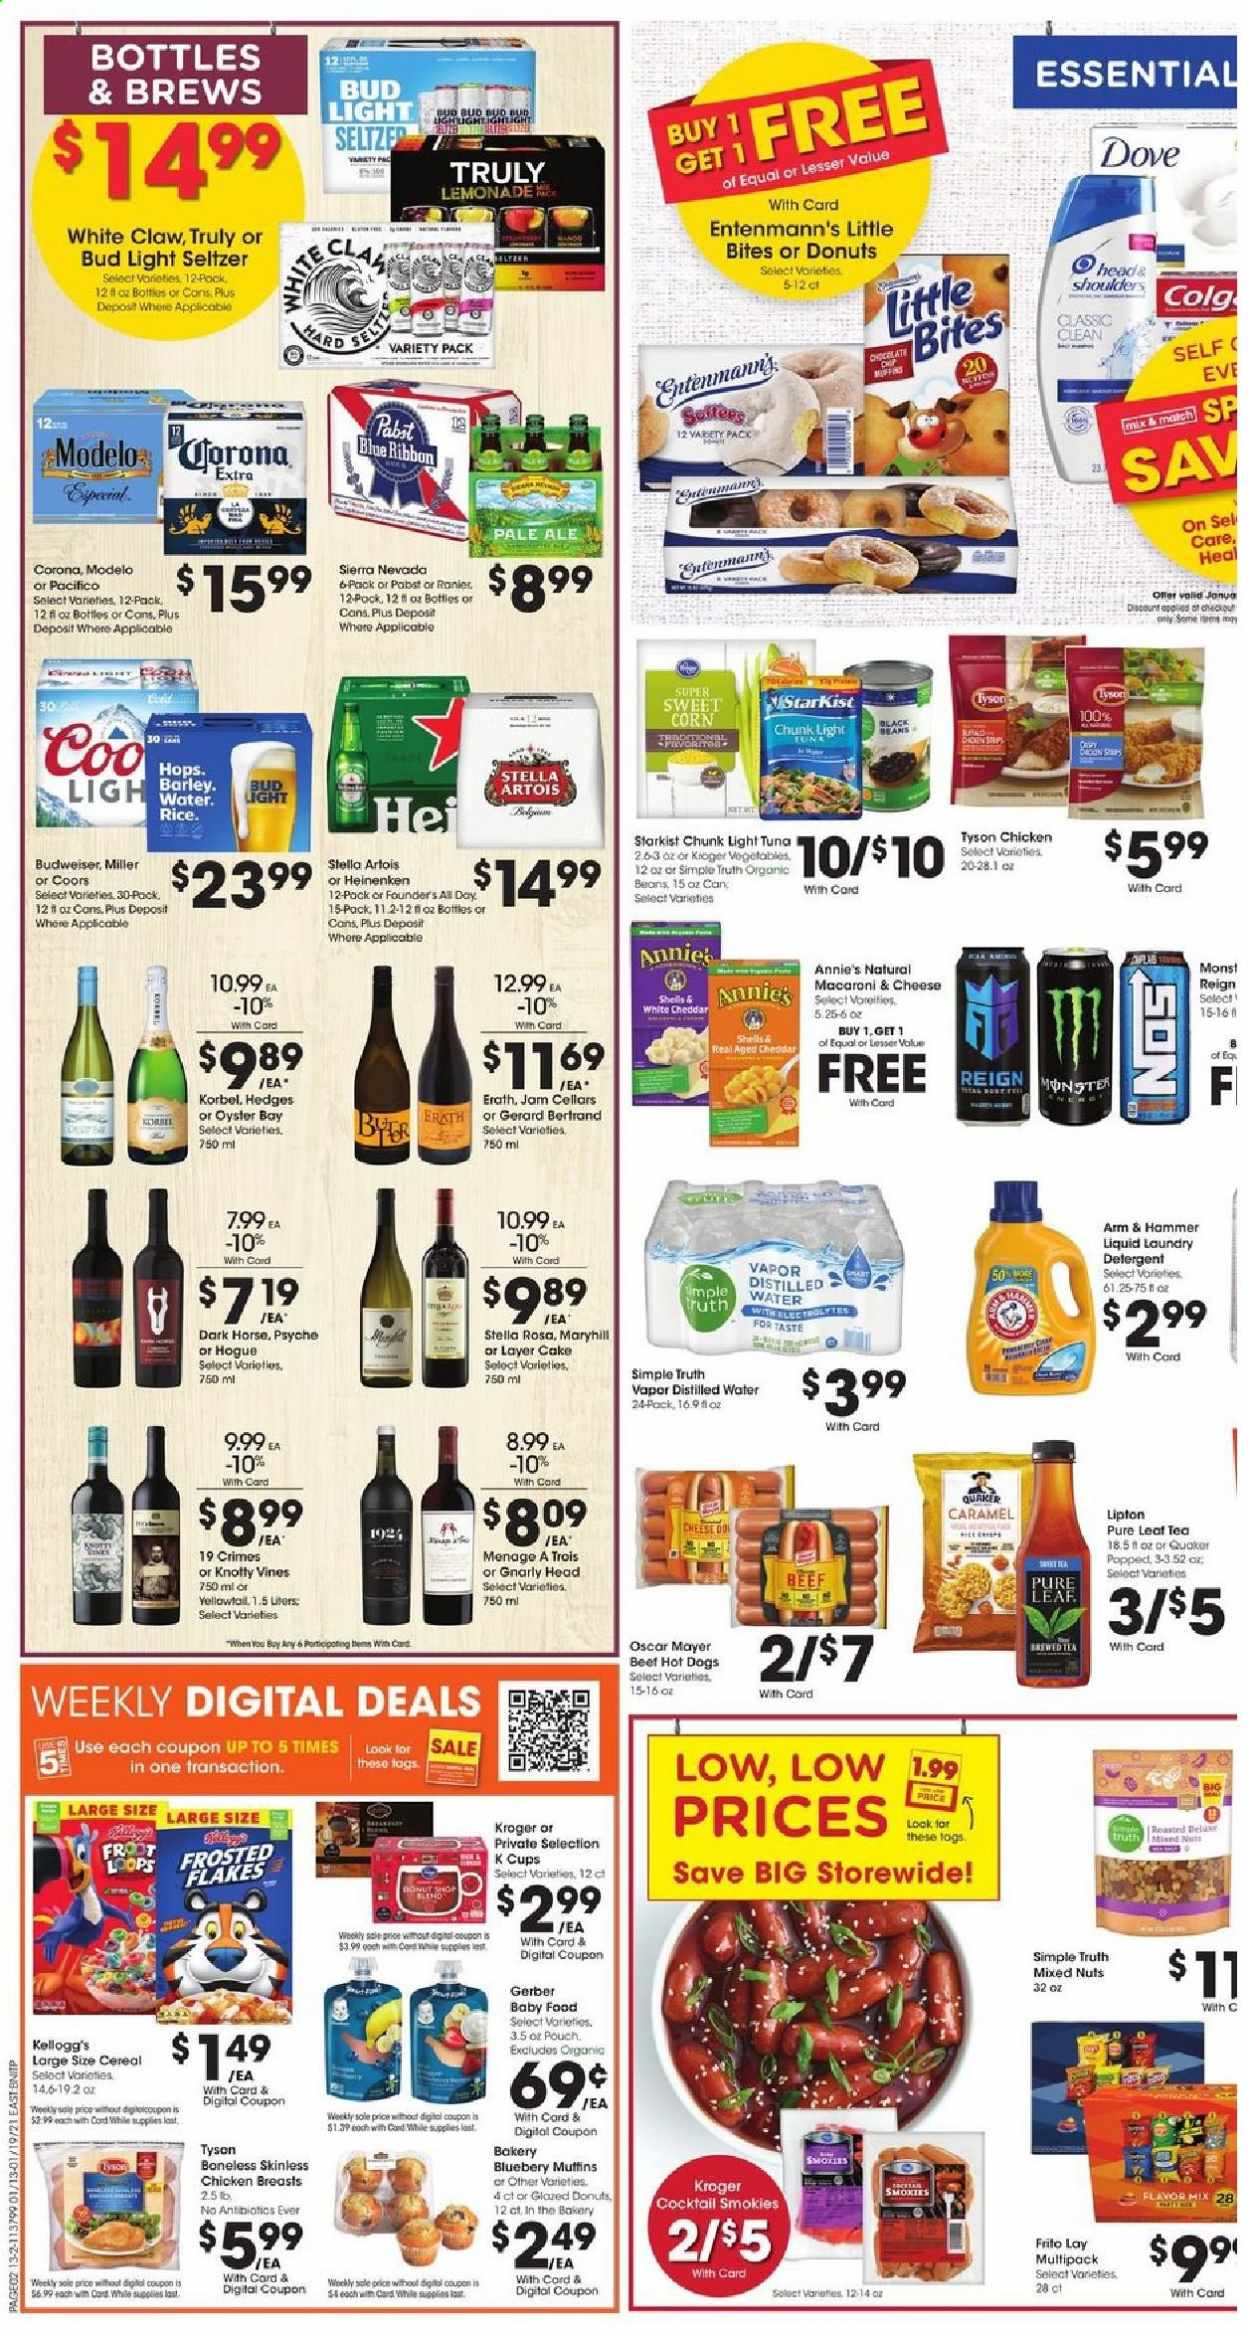 thumbnail - Fred Meyer Flyer - 01/13/2021 - 01/19/2021 - Sales products - Budweiser, Stella Artois, Coors, Blue Ribbon, cake, donut, muffin, Entenmann's, Little Bites, tuna, yellowtail, StarKist, macaroni & cheese, hot dog, Quaker, Annie's, Oscar Mayer, cheddar, beans, corn, sweet corn, Kellogg's, Gerber, ARM & HAMMER, light tuna, cereals, Frosted Flakes, black beans, rice, caramel, fruit jam, mixed nuts, lemonade, Monster, Lipton, seltzer water, tea, Pure Leaf, coffee capsules, K-Cups, White Claw, TRULY, beer, Bud Light, Corona Extra, Miller, Modelo, chicken breasts, Dove, detergent, laundry detergent, cup, distilled water. Page 2.